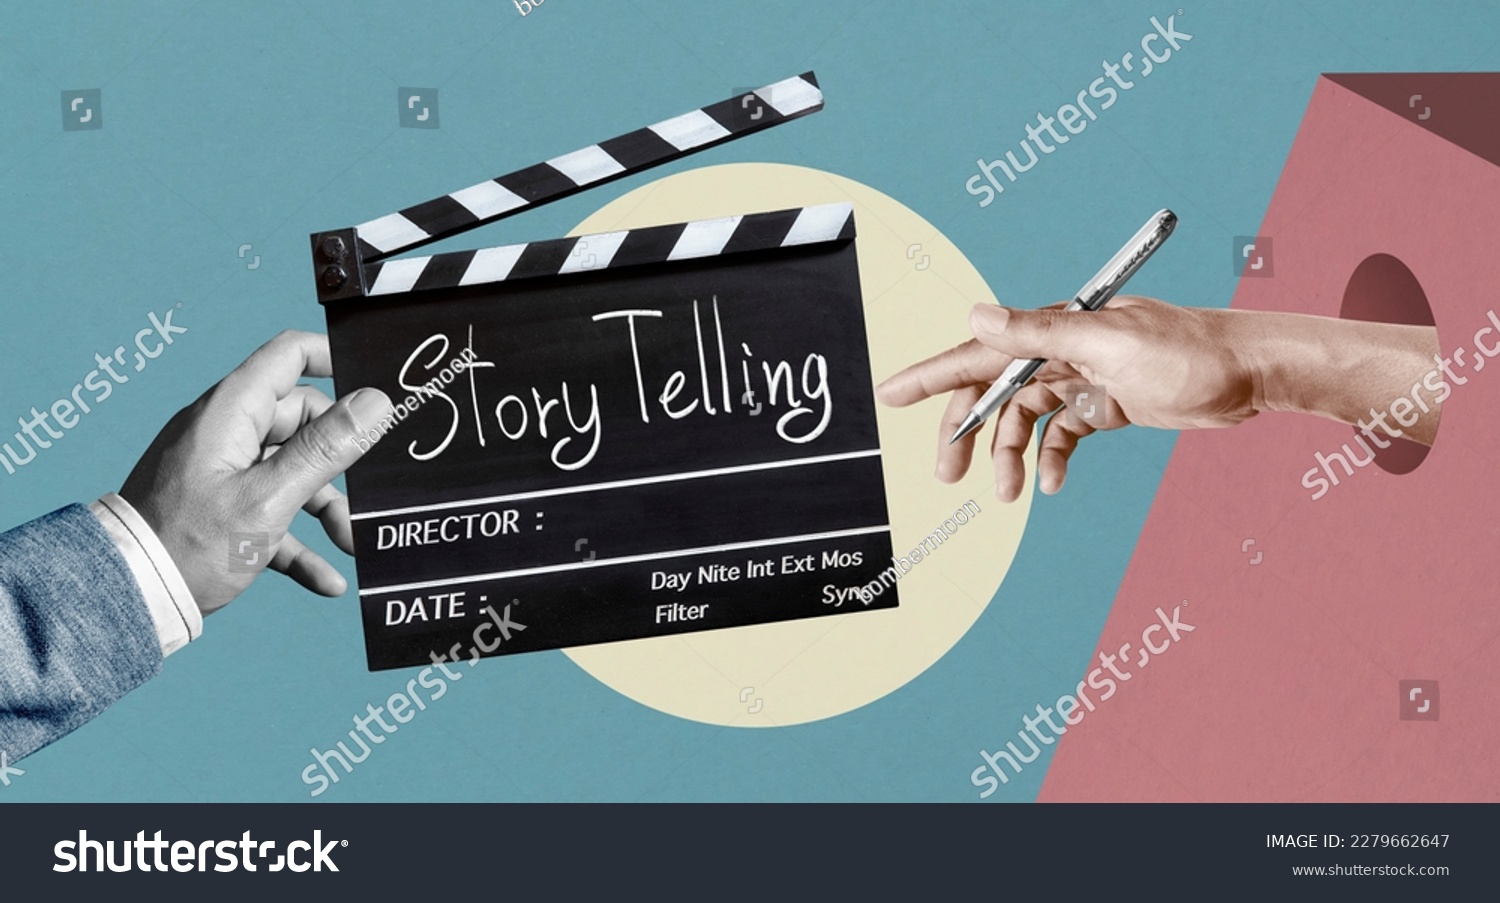 Story telling text title on film slate or movie Clapper board  for filmmaker and film industry.Abstract art collage.	 #2279662647